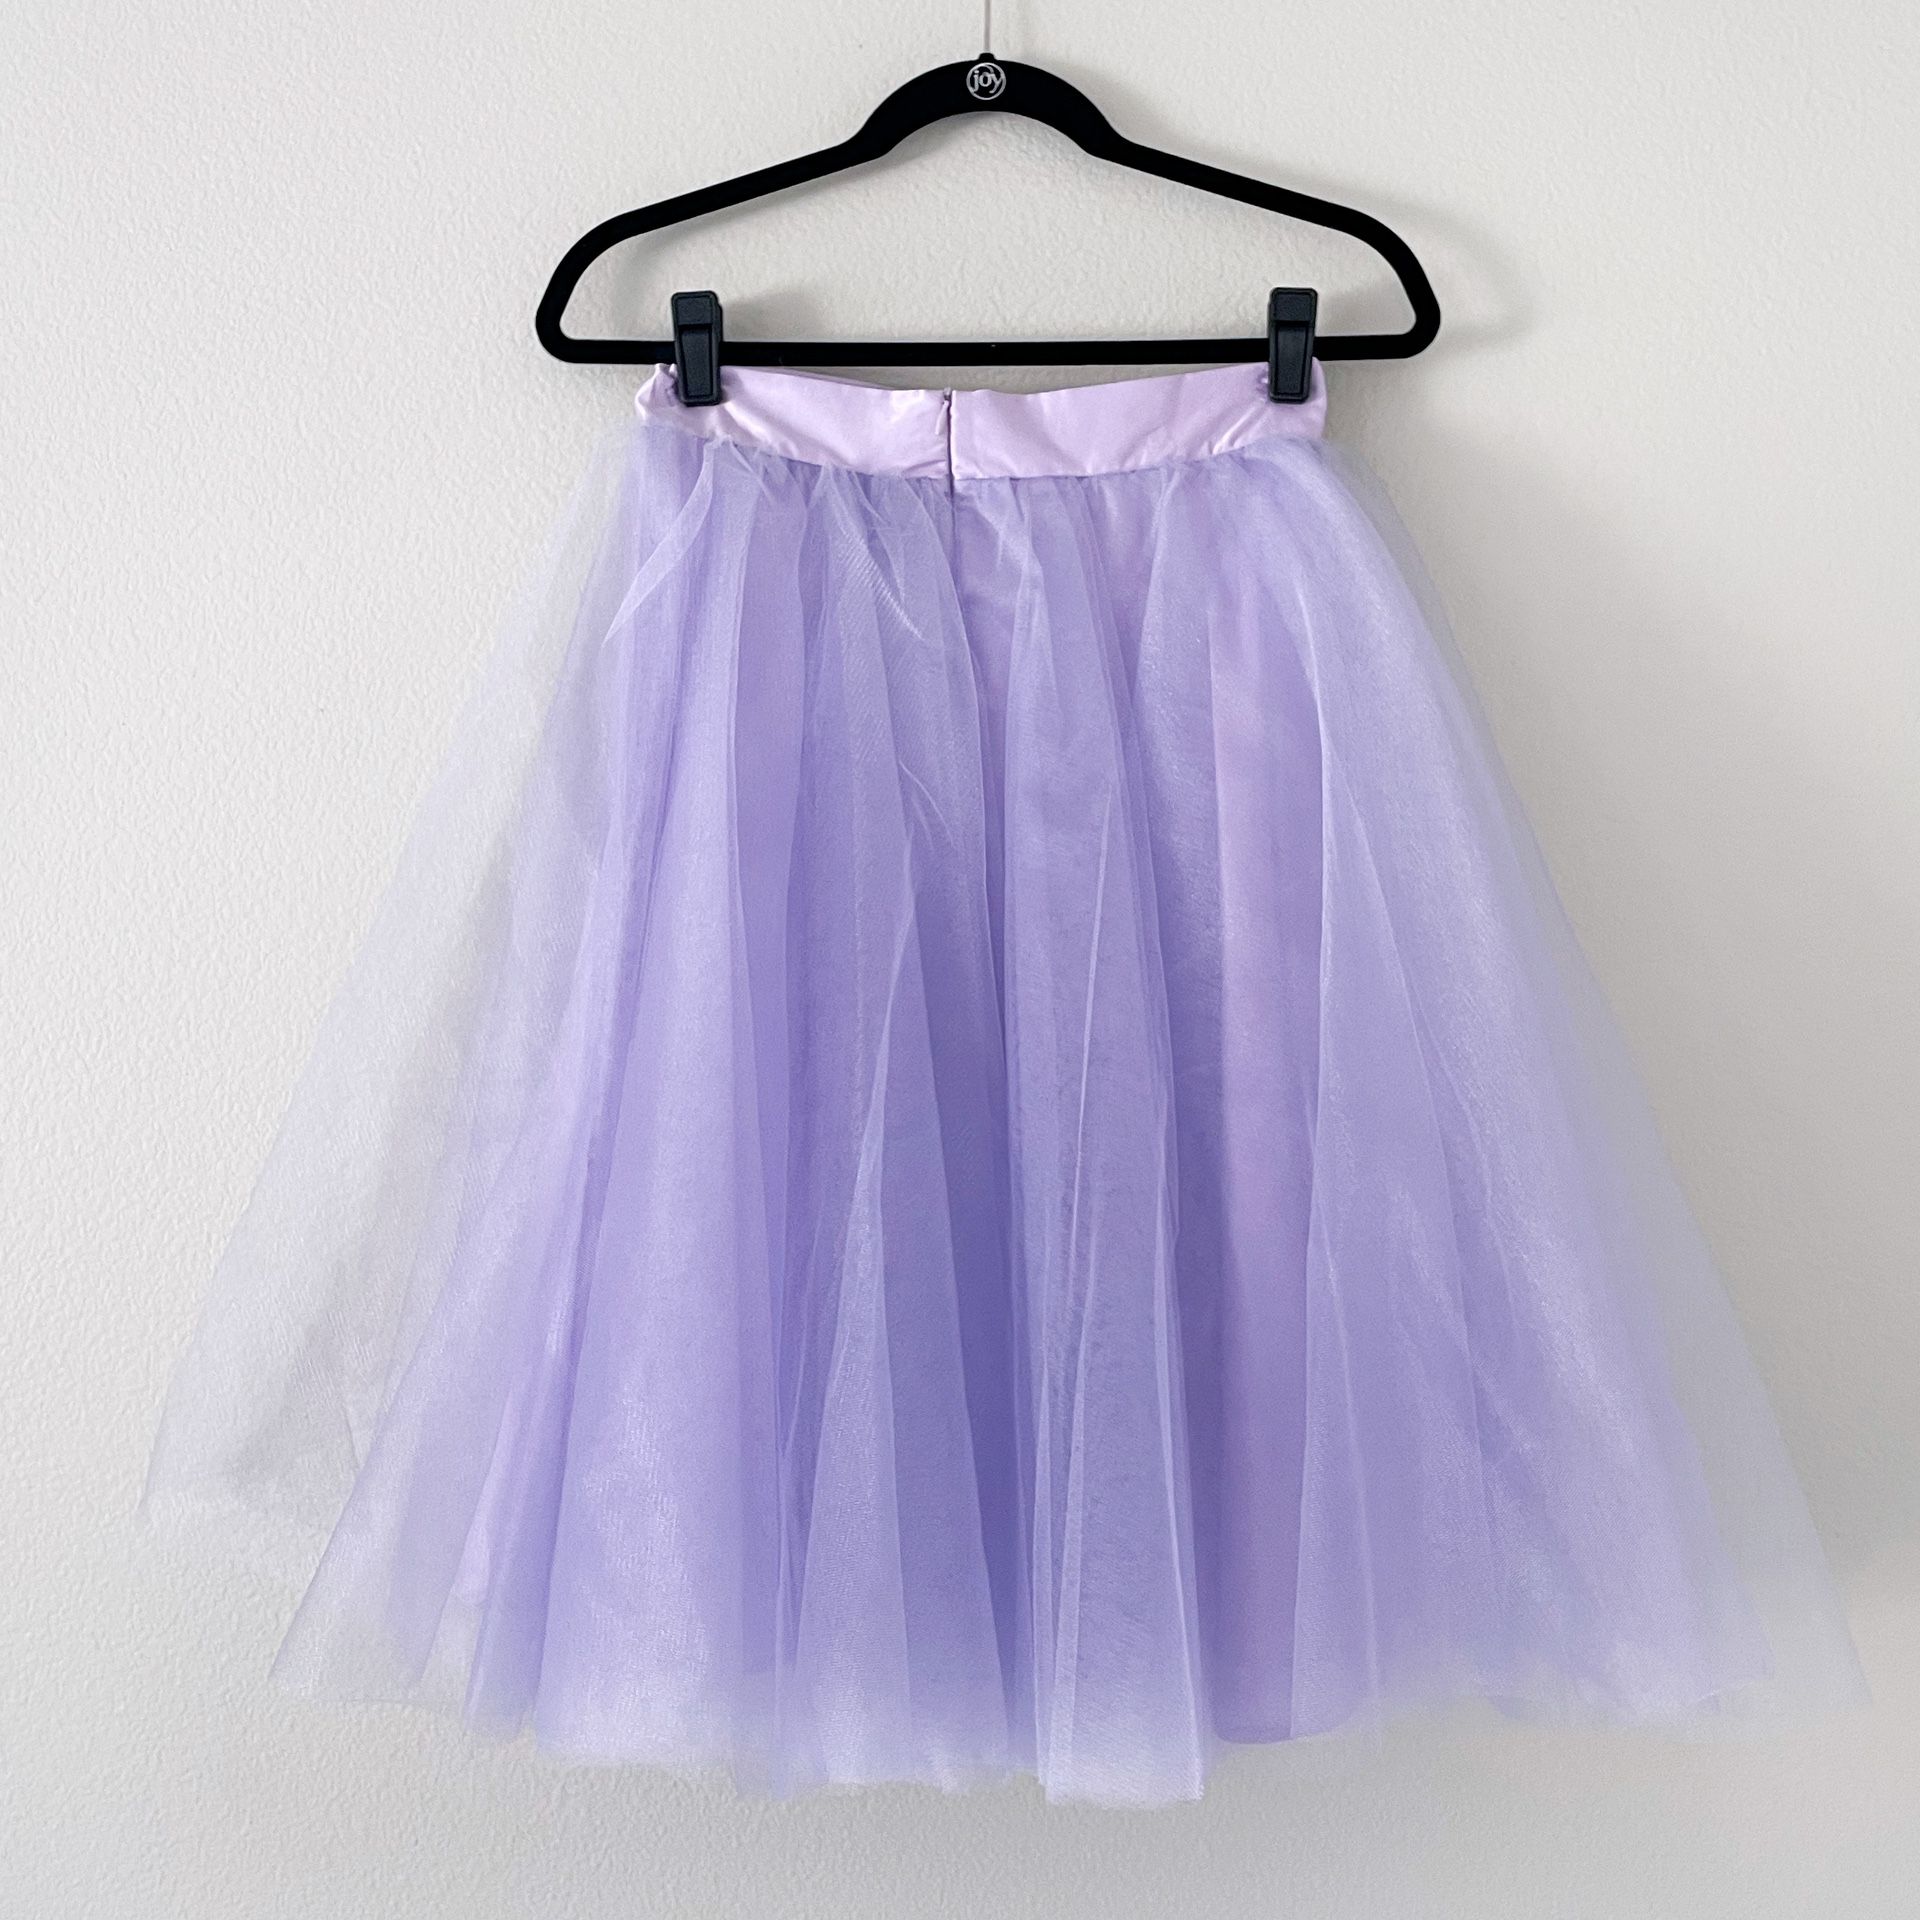 SPACE 46 BOUTIQUE Tulle Tutu Wendy Skirt MRS. POTTS Costume Accessories 4